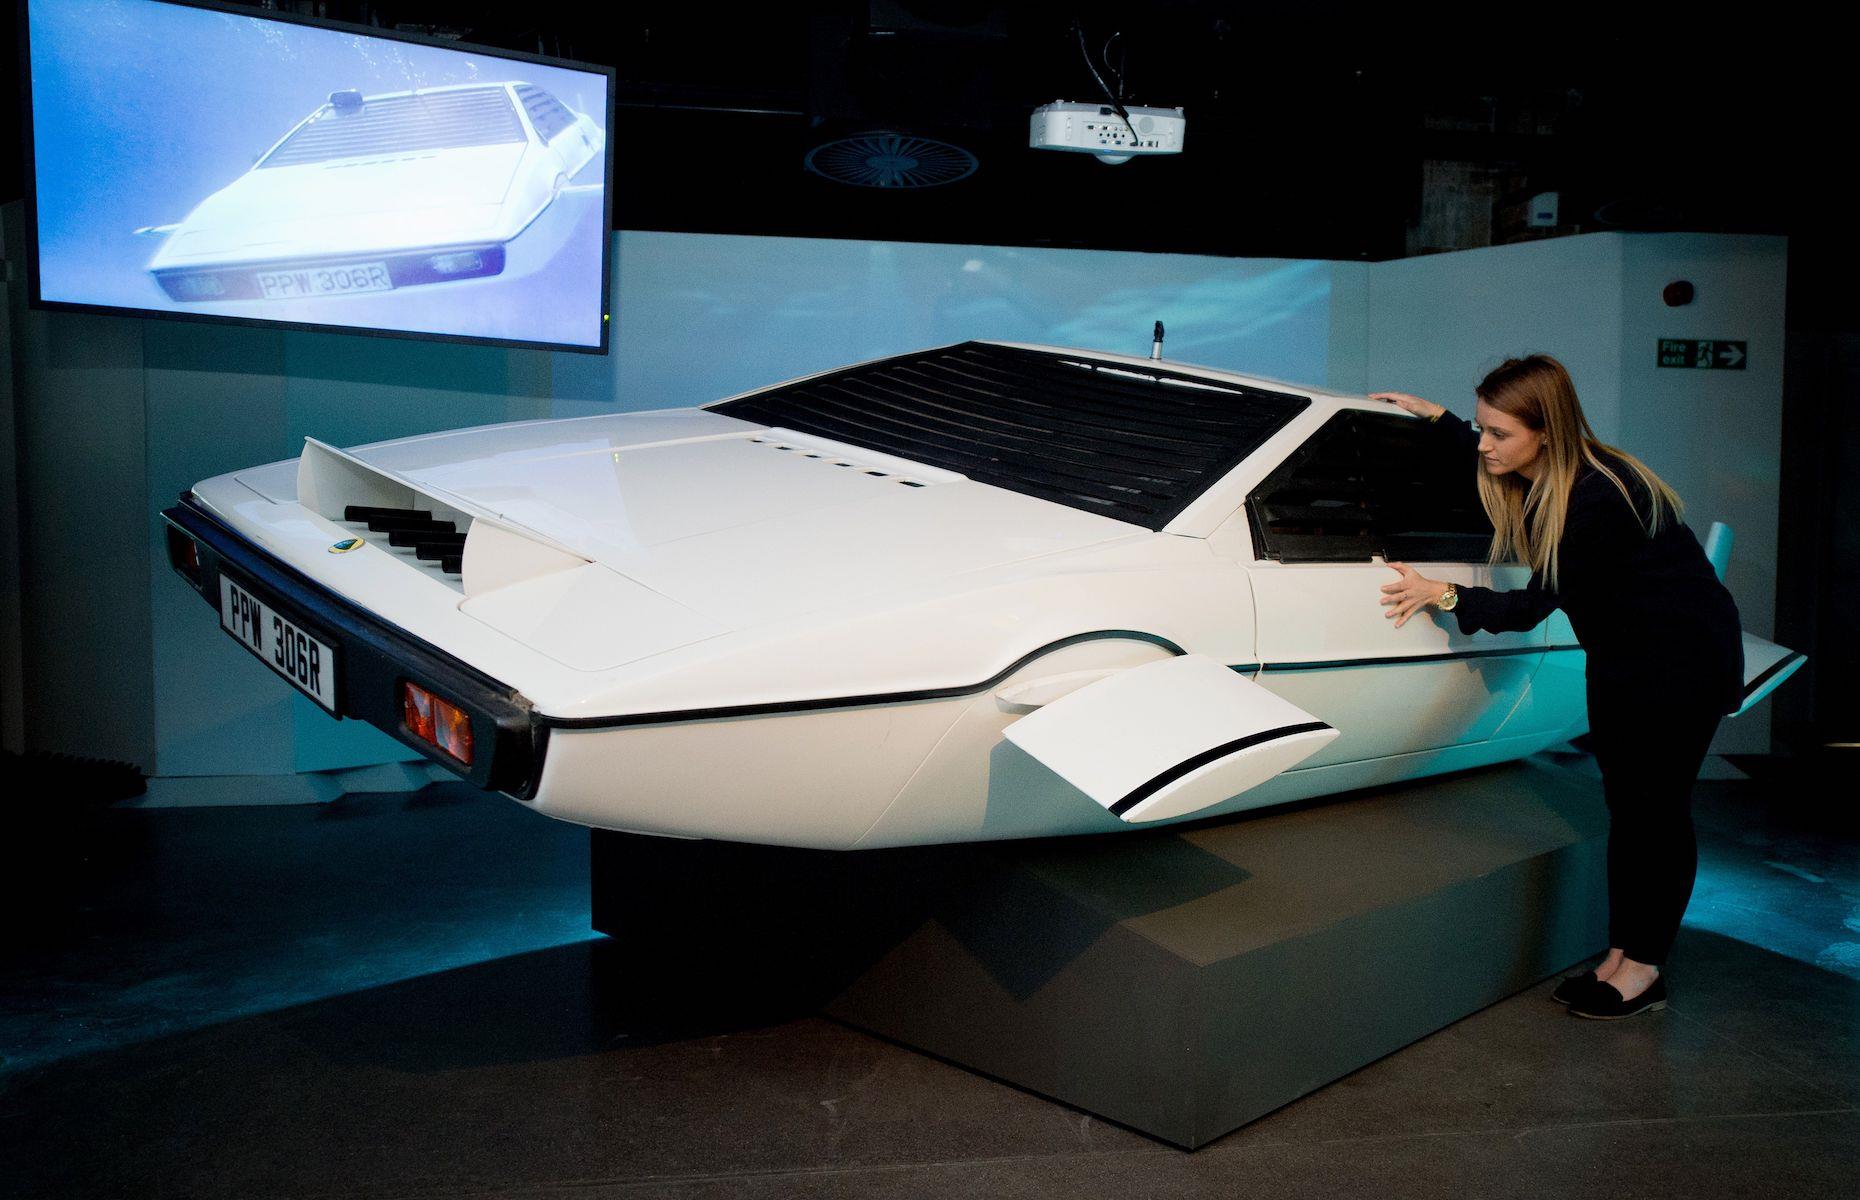 The James Bond underwater car sold to Elon Musk for $802,000 (£616k)